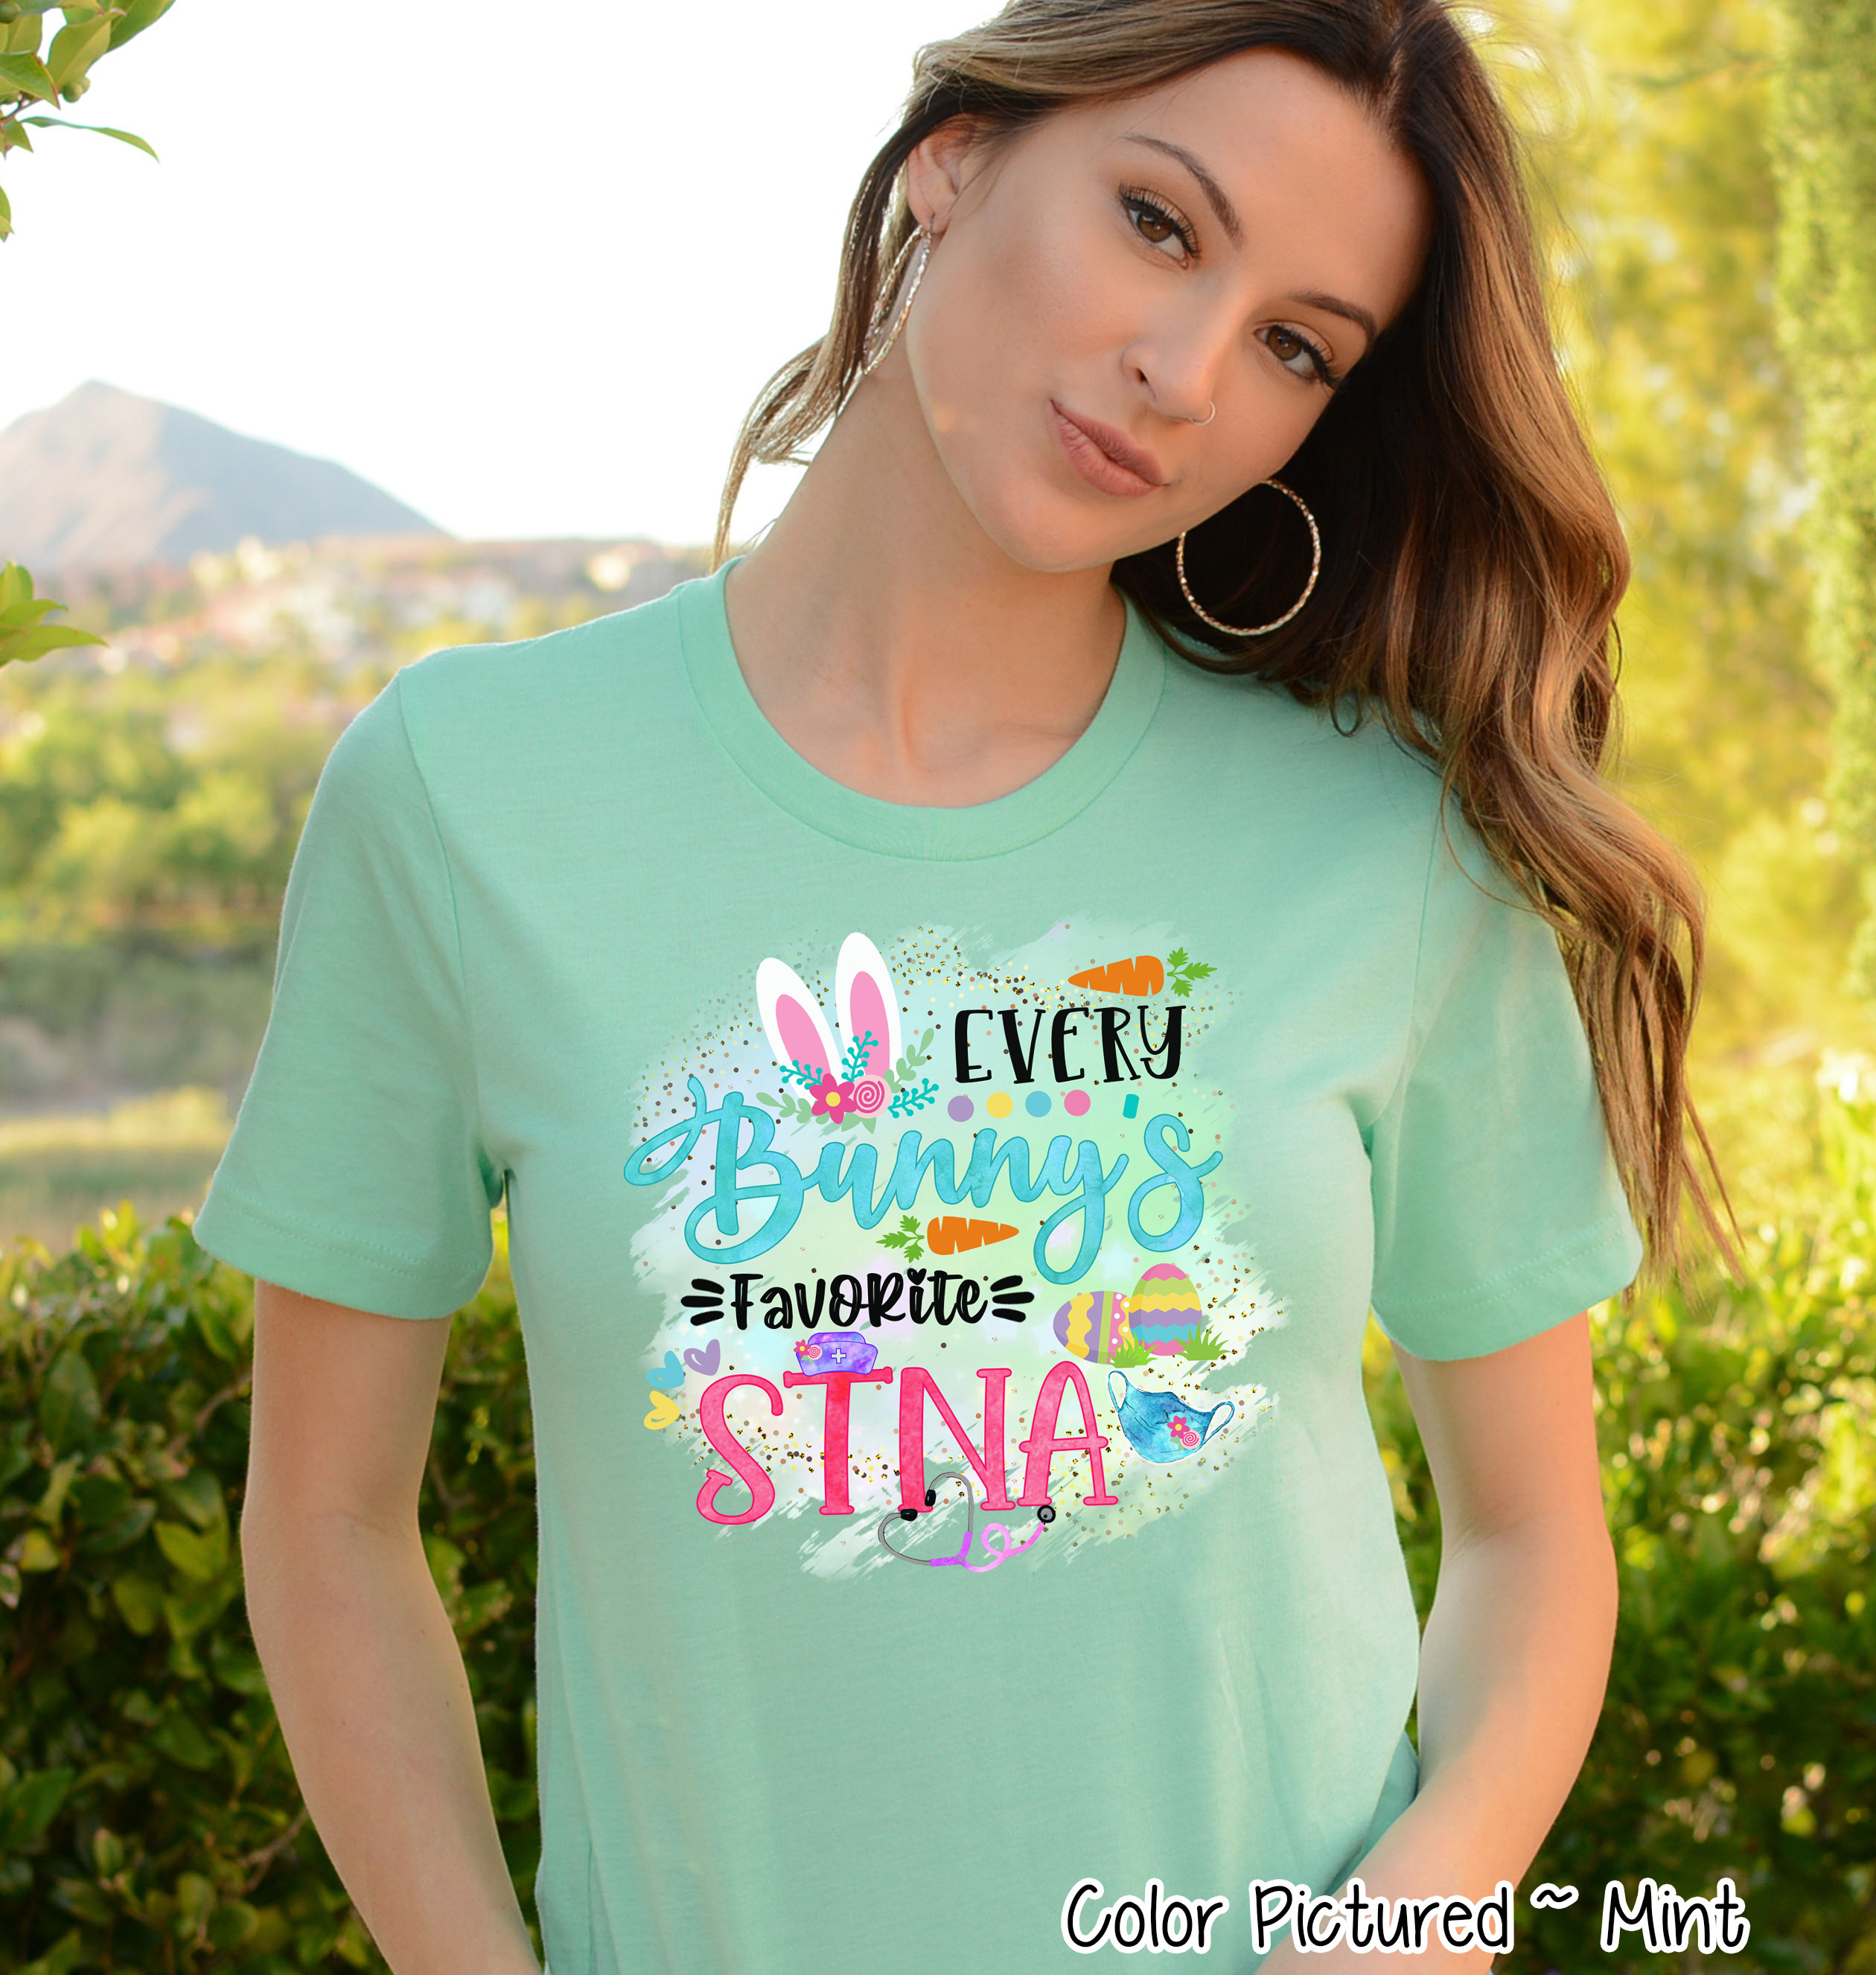 Every Bunny's Favorite STNA Easter Tee